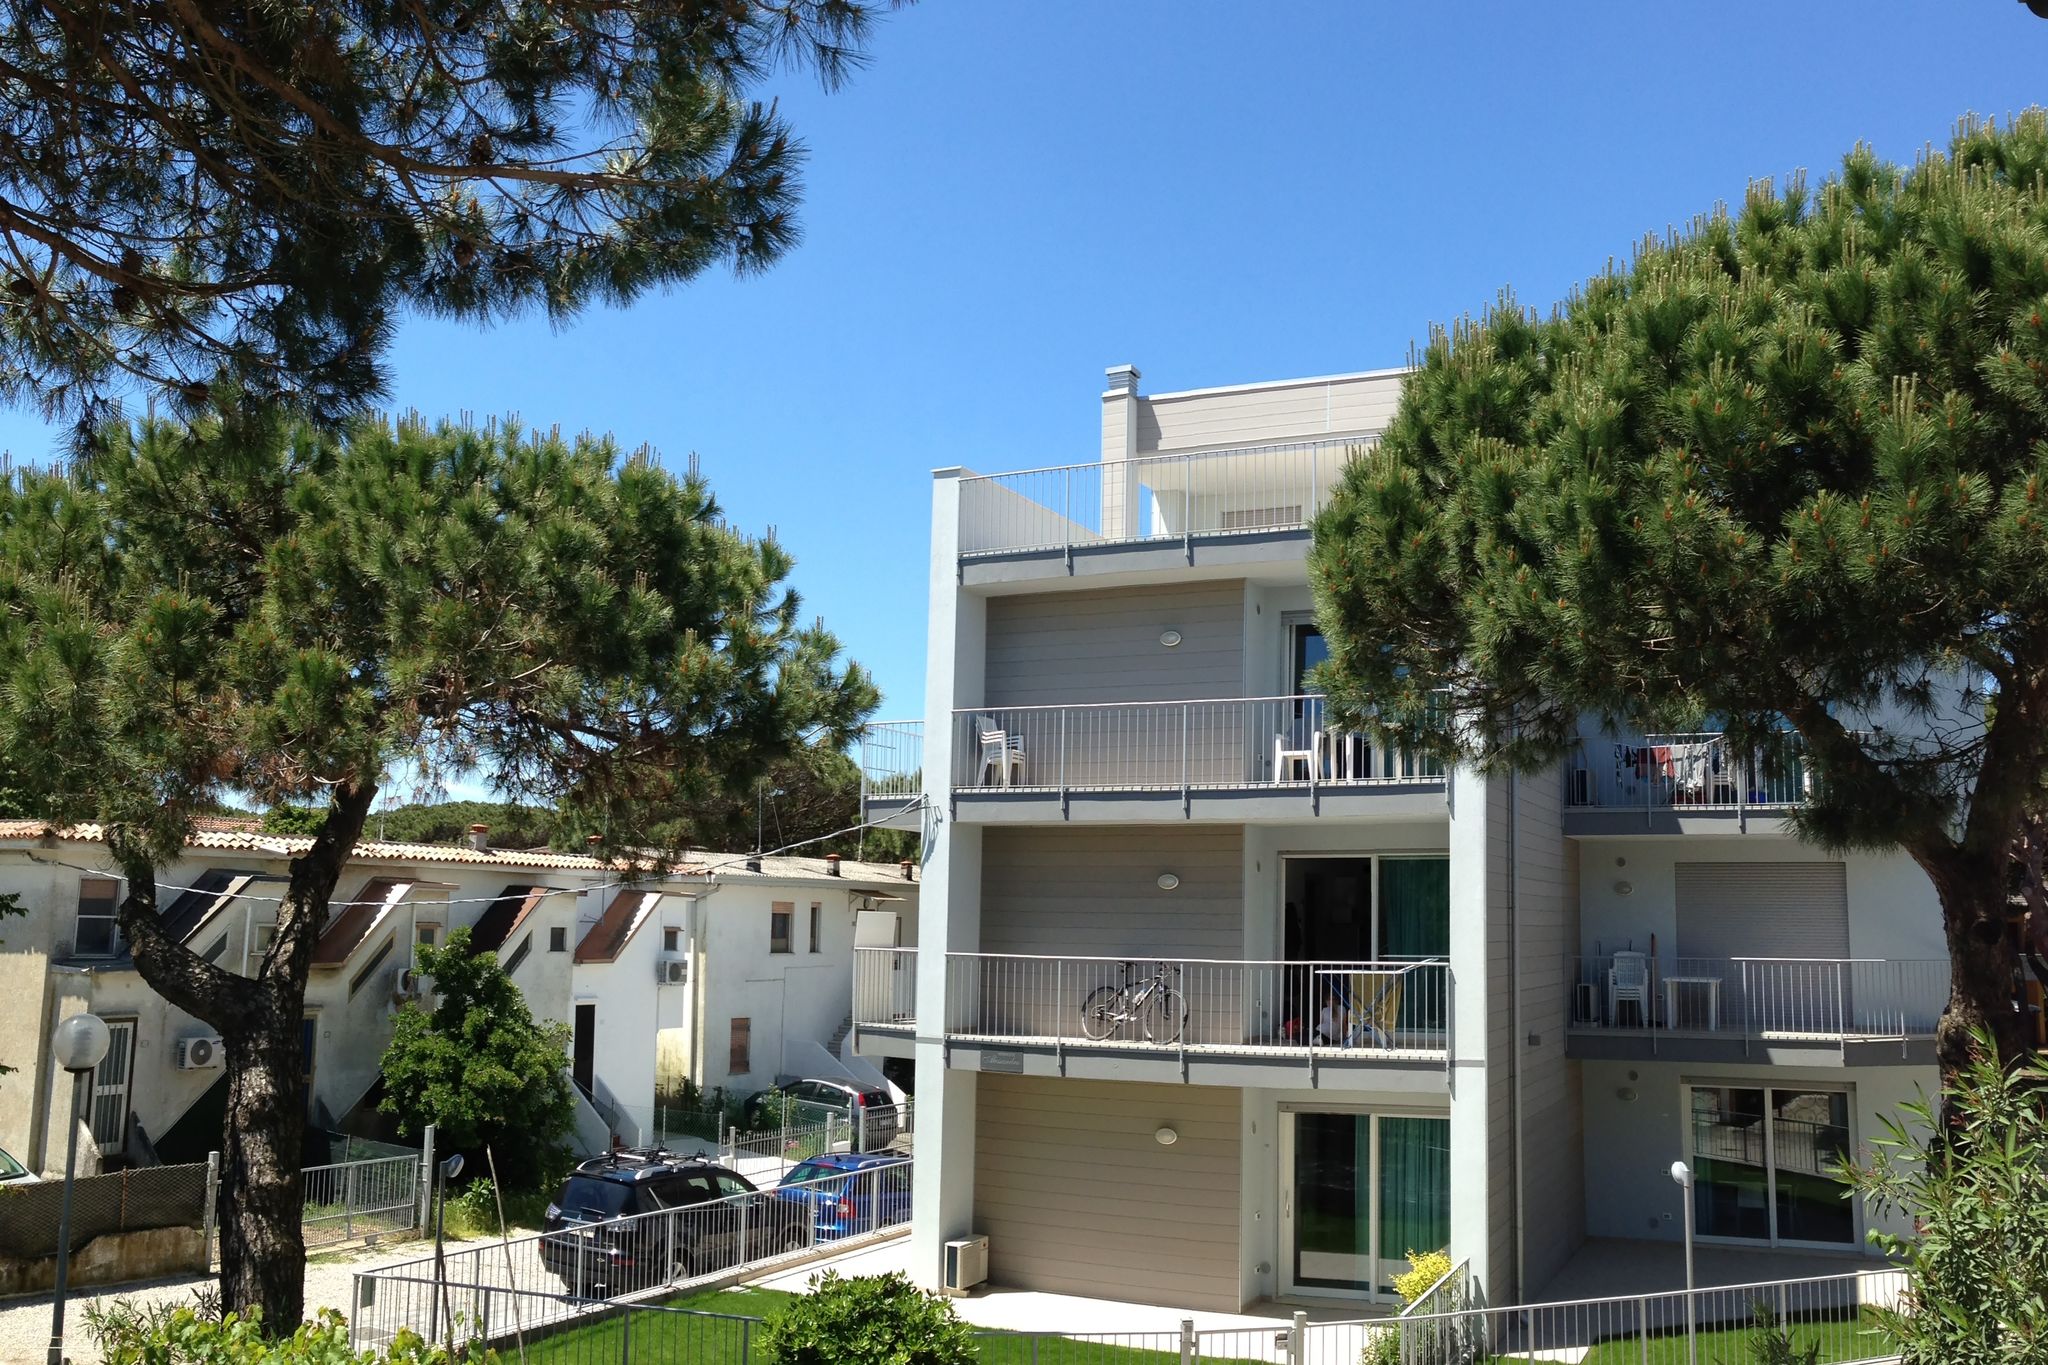 Modern holiday home close to sea front, in Rosolina Mare, near Venice.